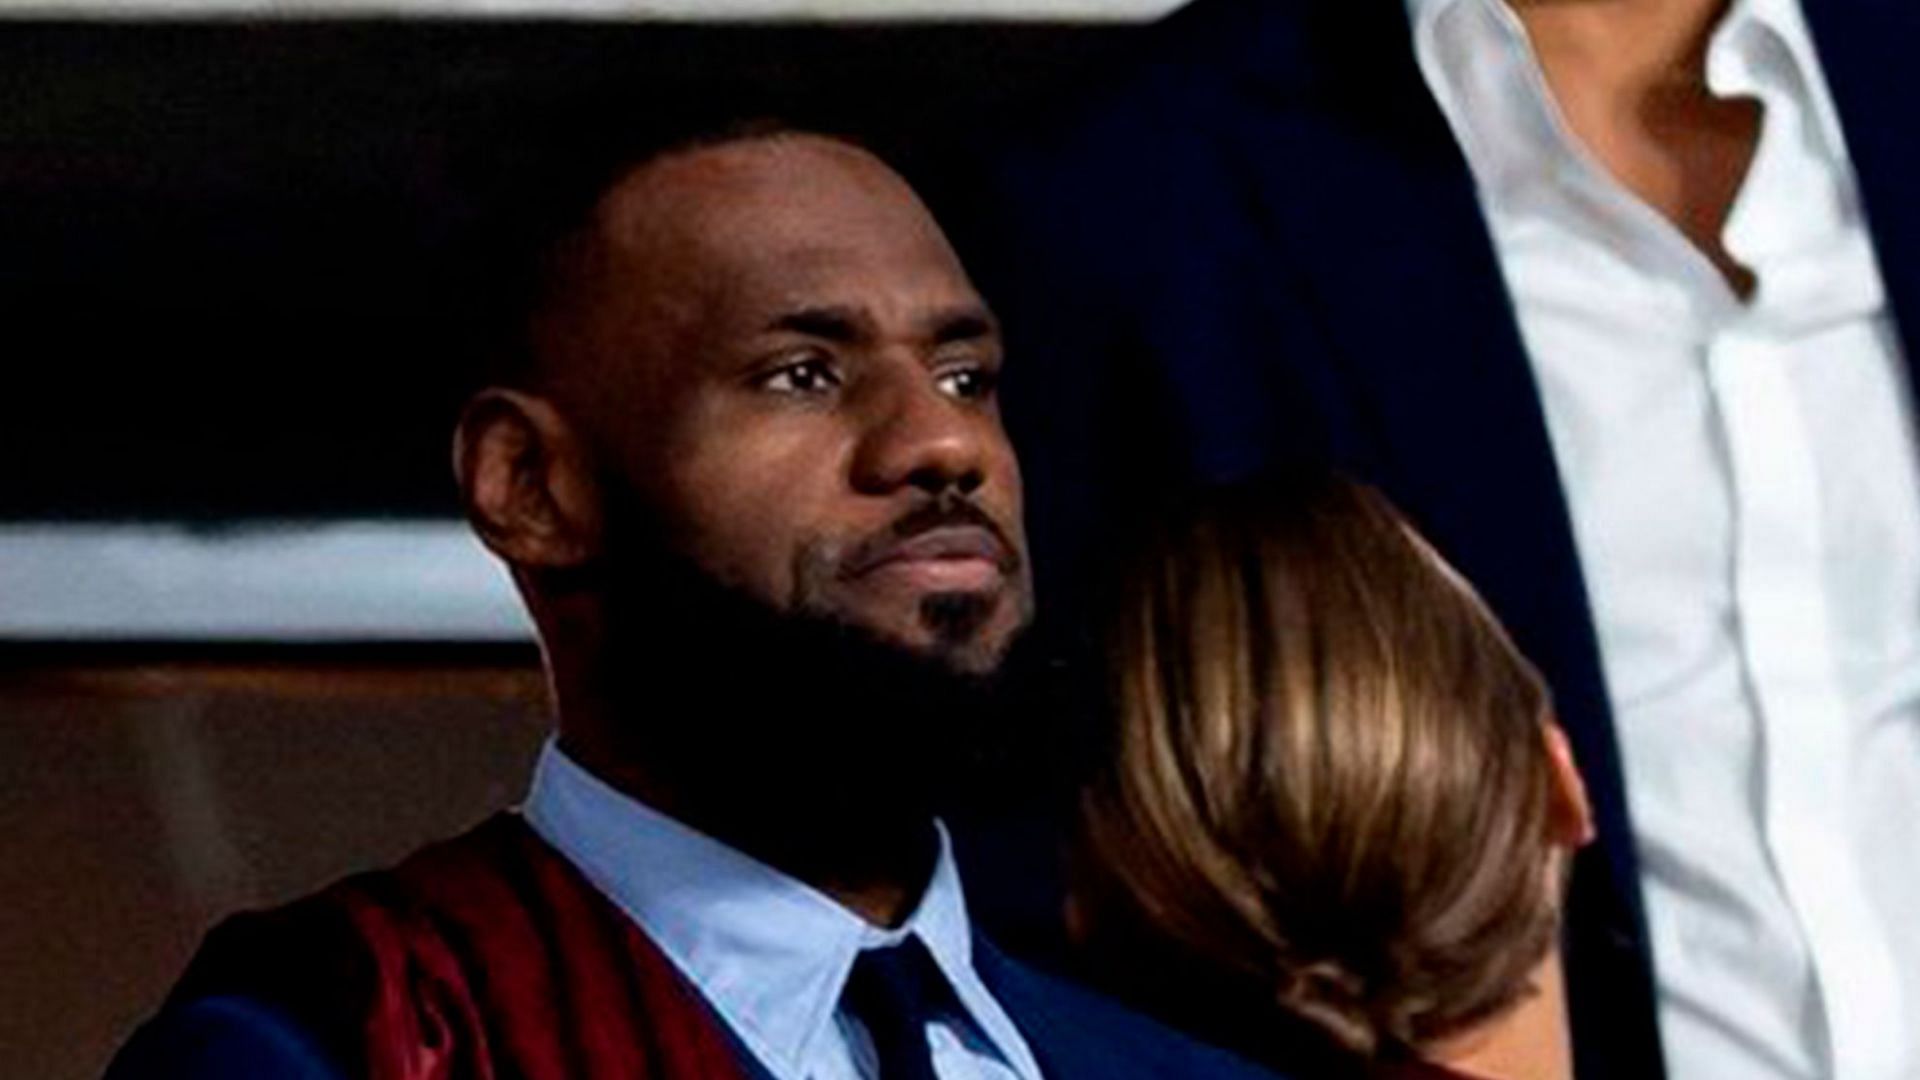 LeBron James in attendance for the UCL Finals between Real Madrid and Liverpool [Photo via Marca]